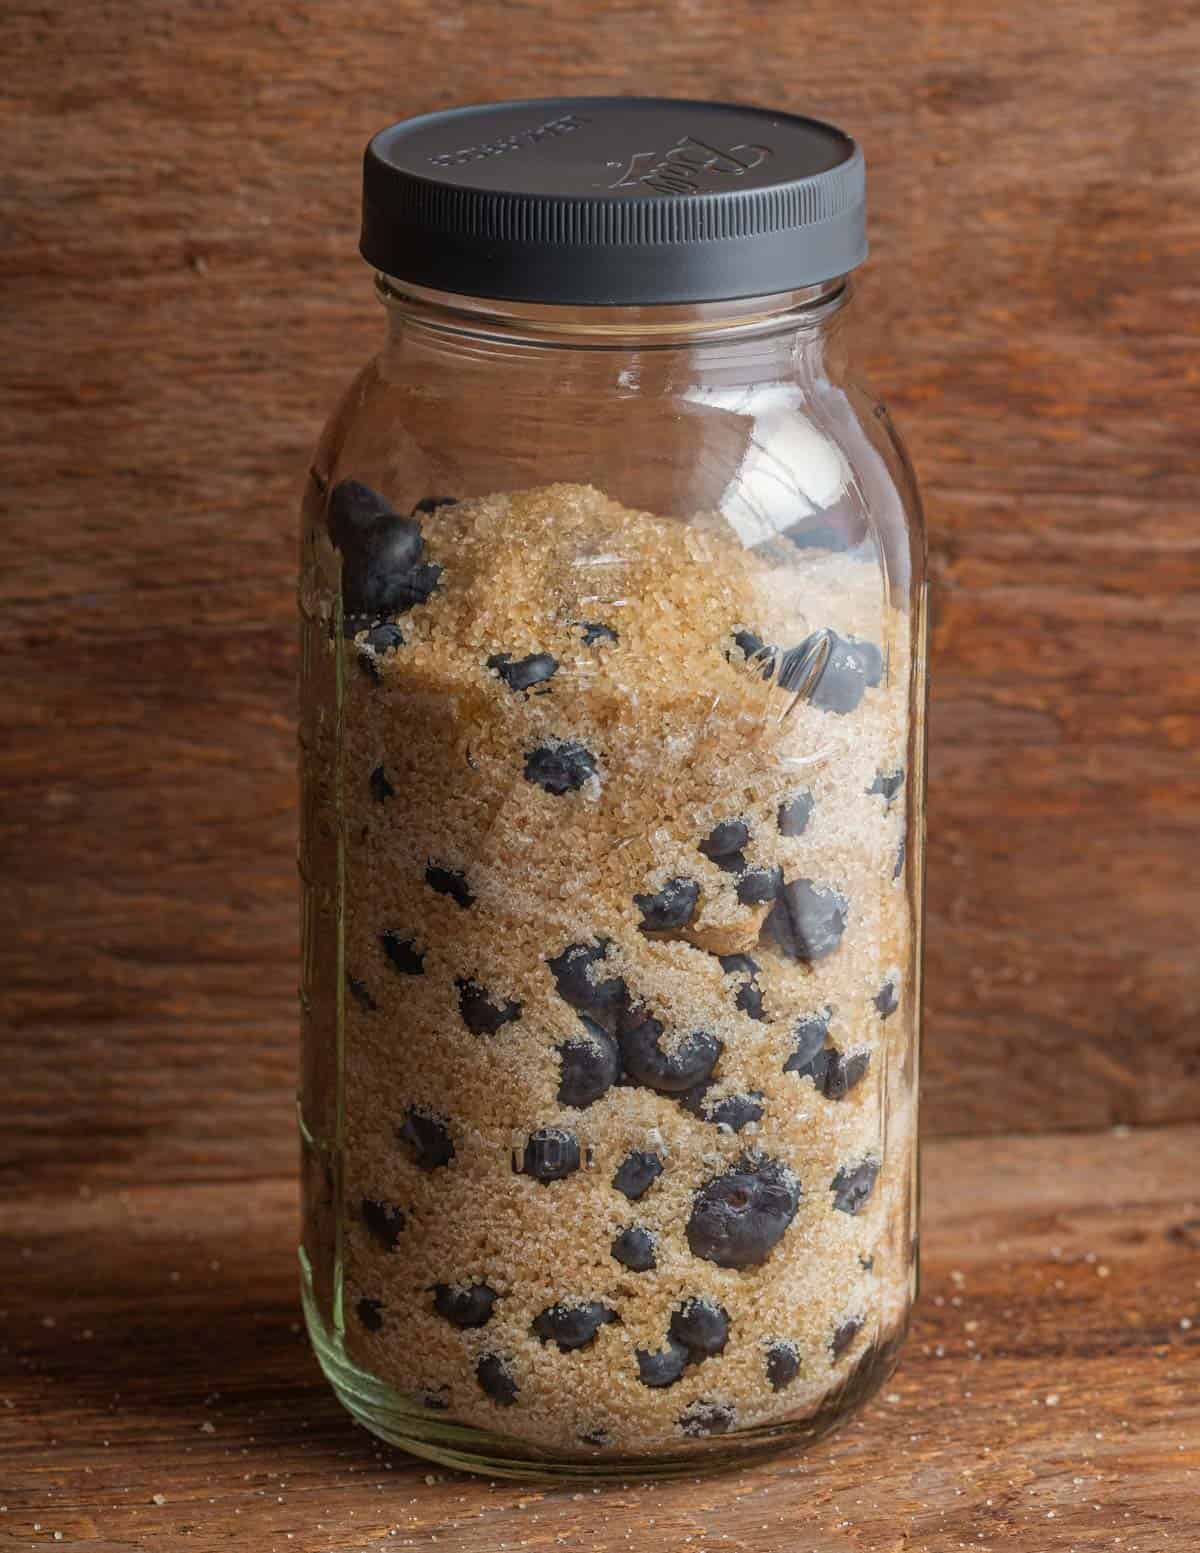 A jar of blueberries and sugar mixed together.